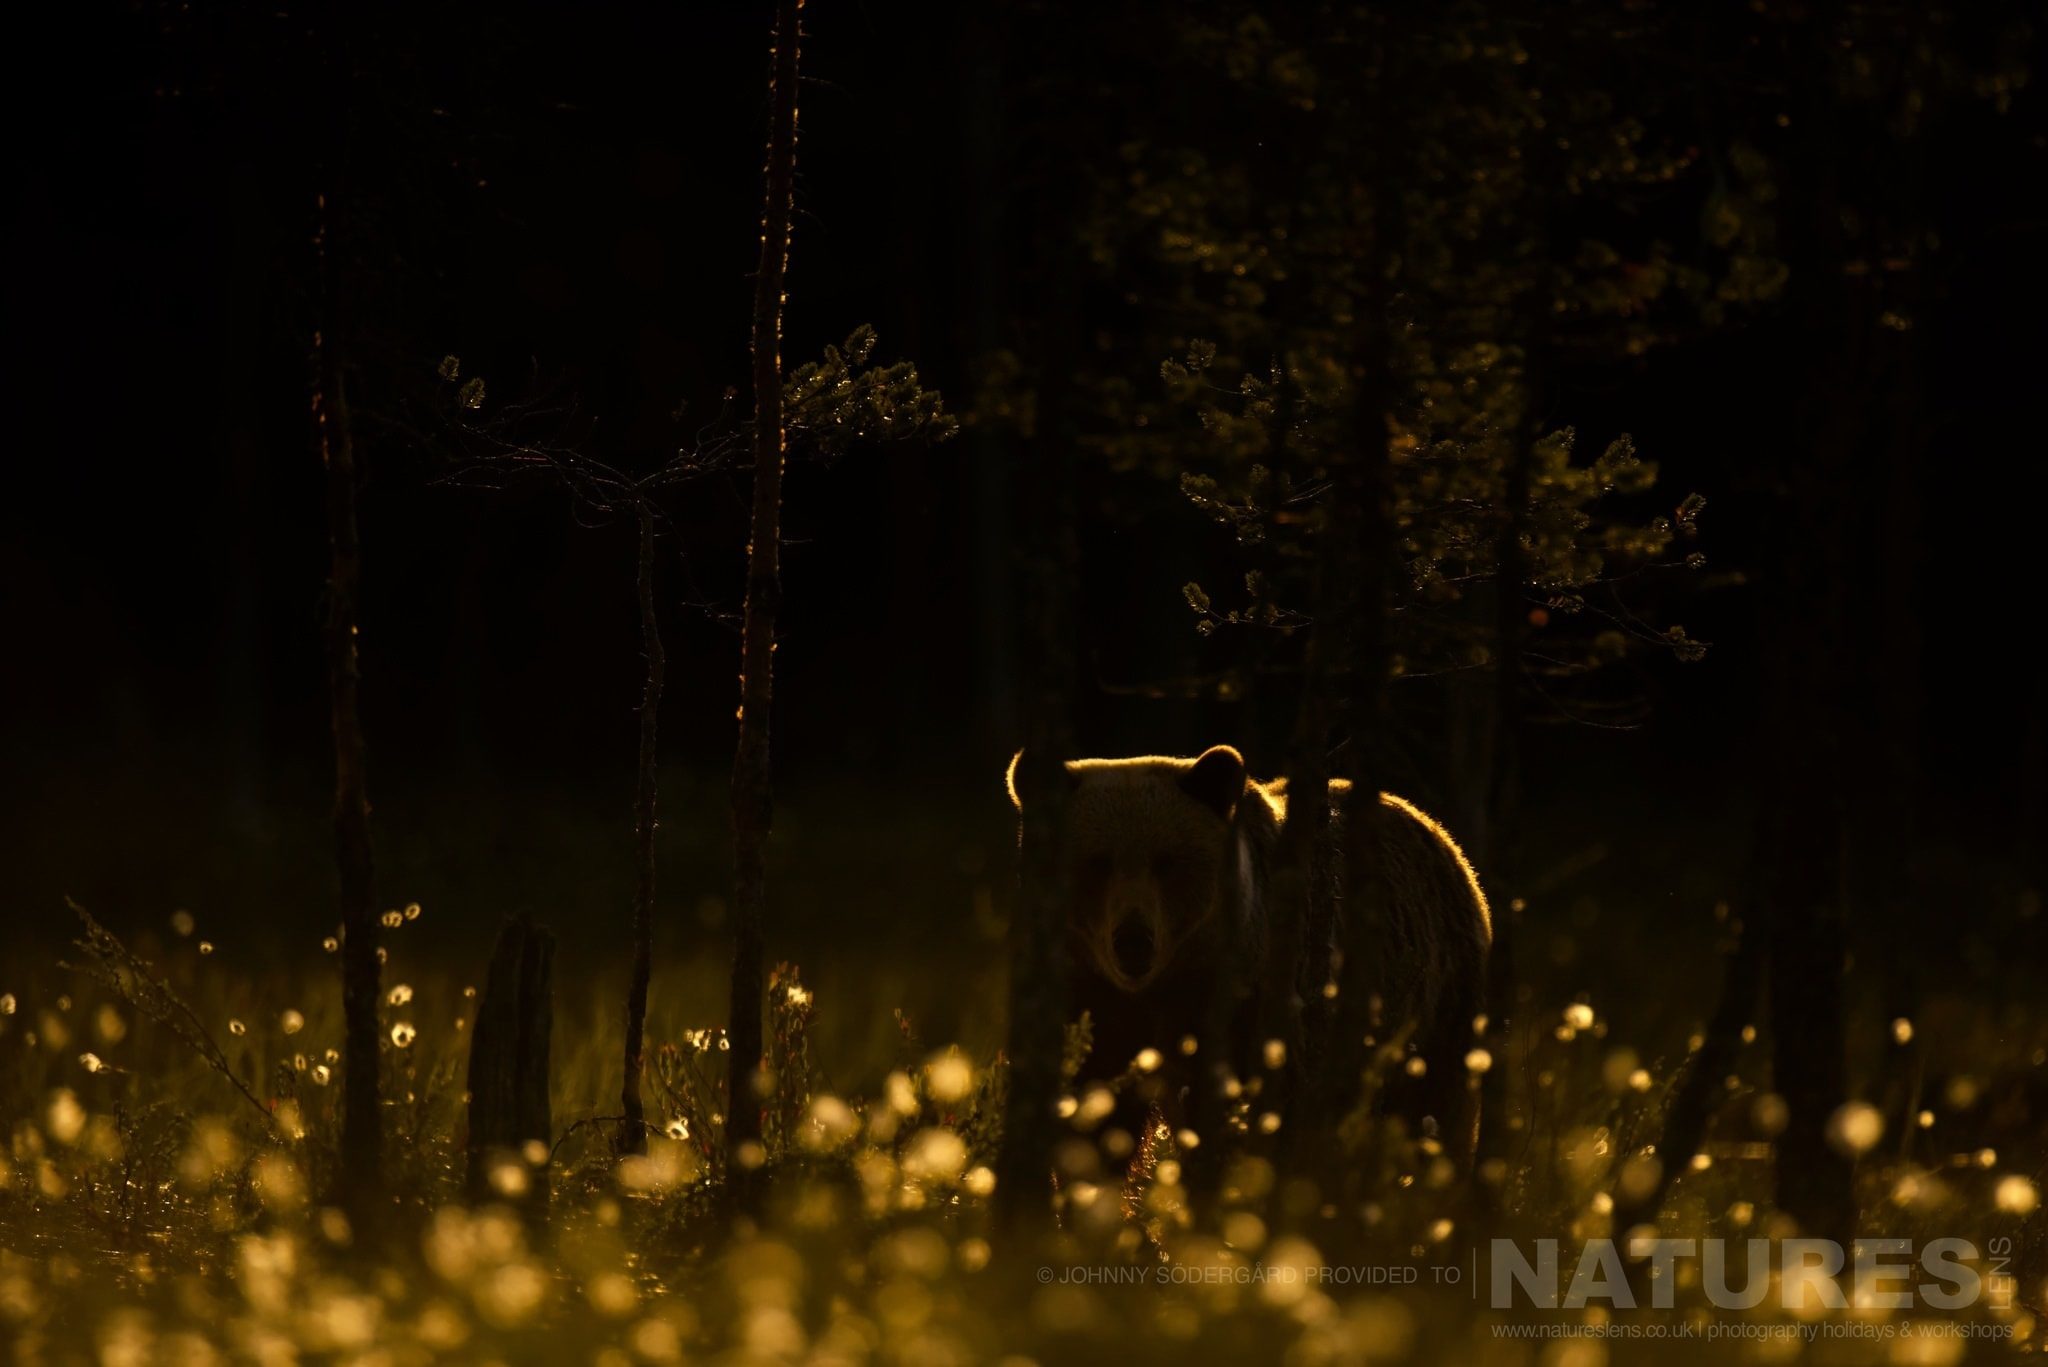 One Of The Large Bears Rim Lit In Golden Light Amongst The Trees Of The Taiga Photographed By Johnny Södergård During The Natureslens Wild Brown Bears Of Finland Photography Holiday